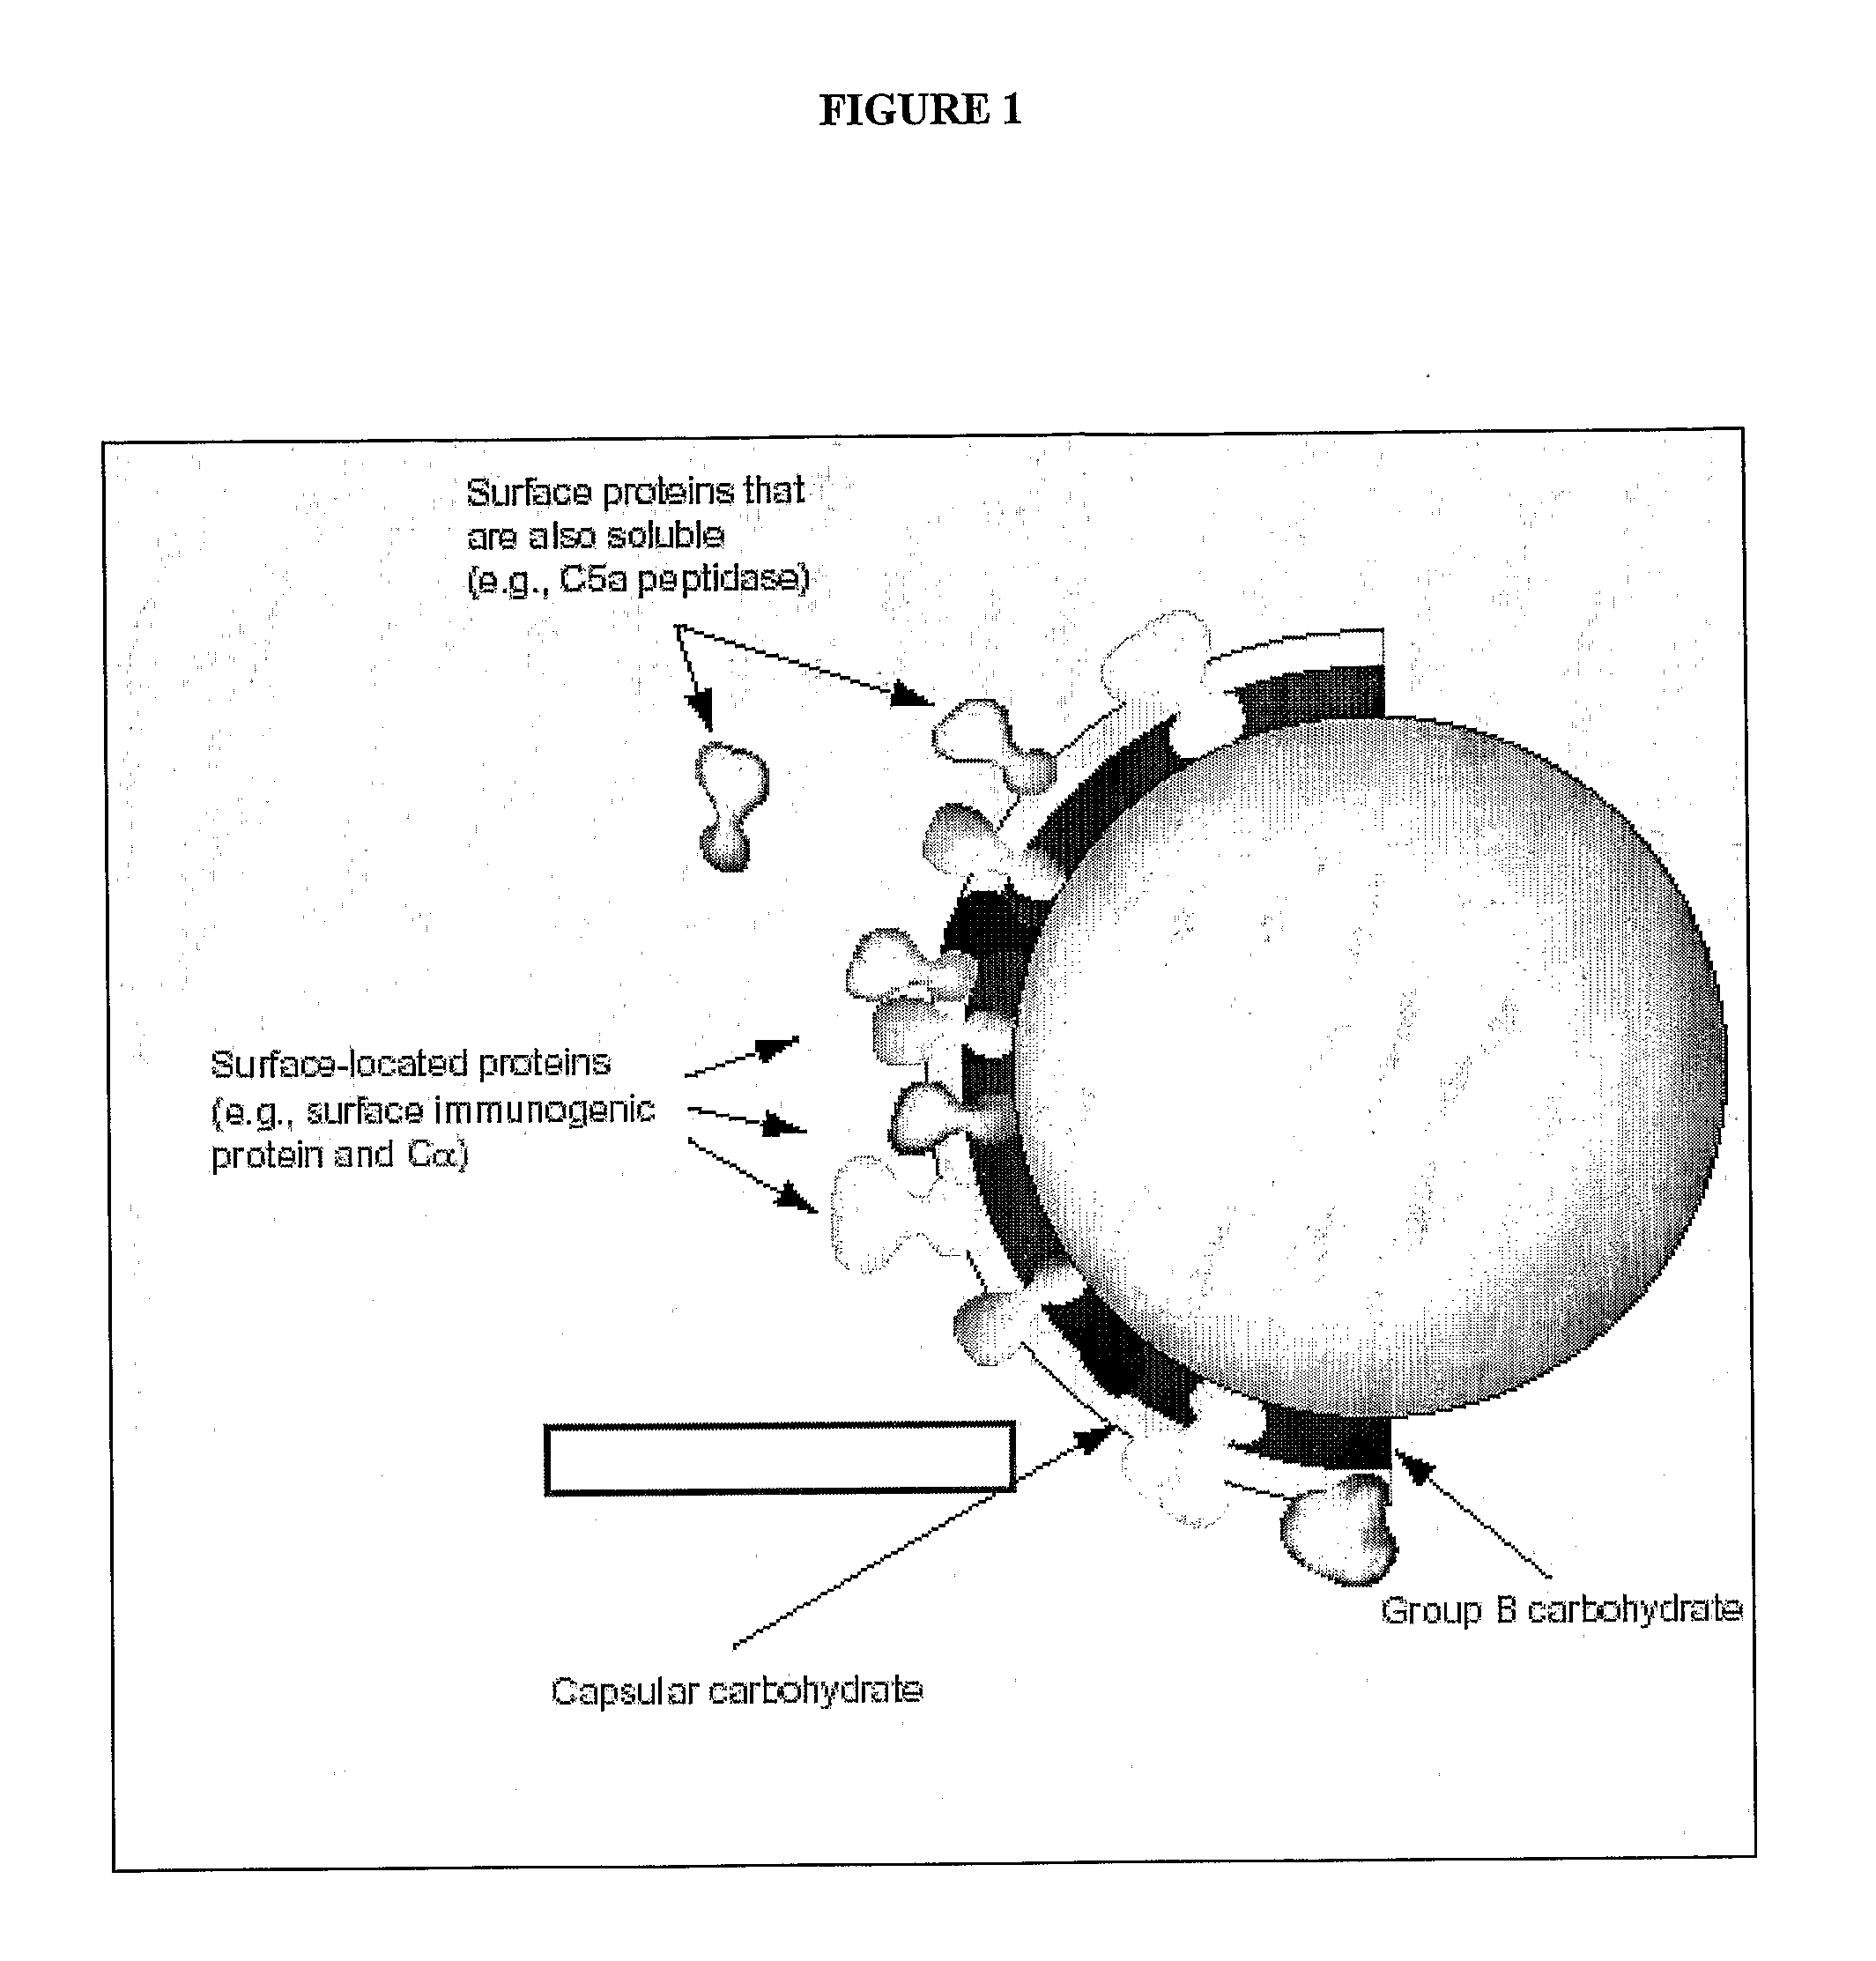 Fermentation processes for cultivating streptococci and purification processes for obtaining cps therefrom